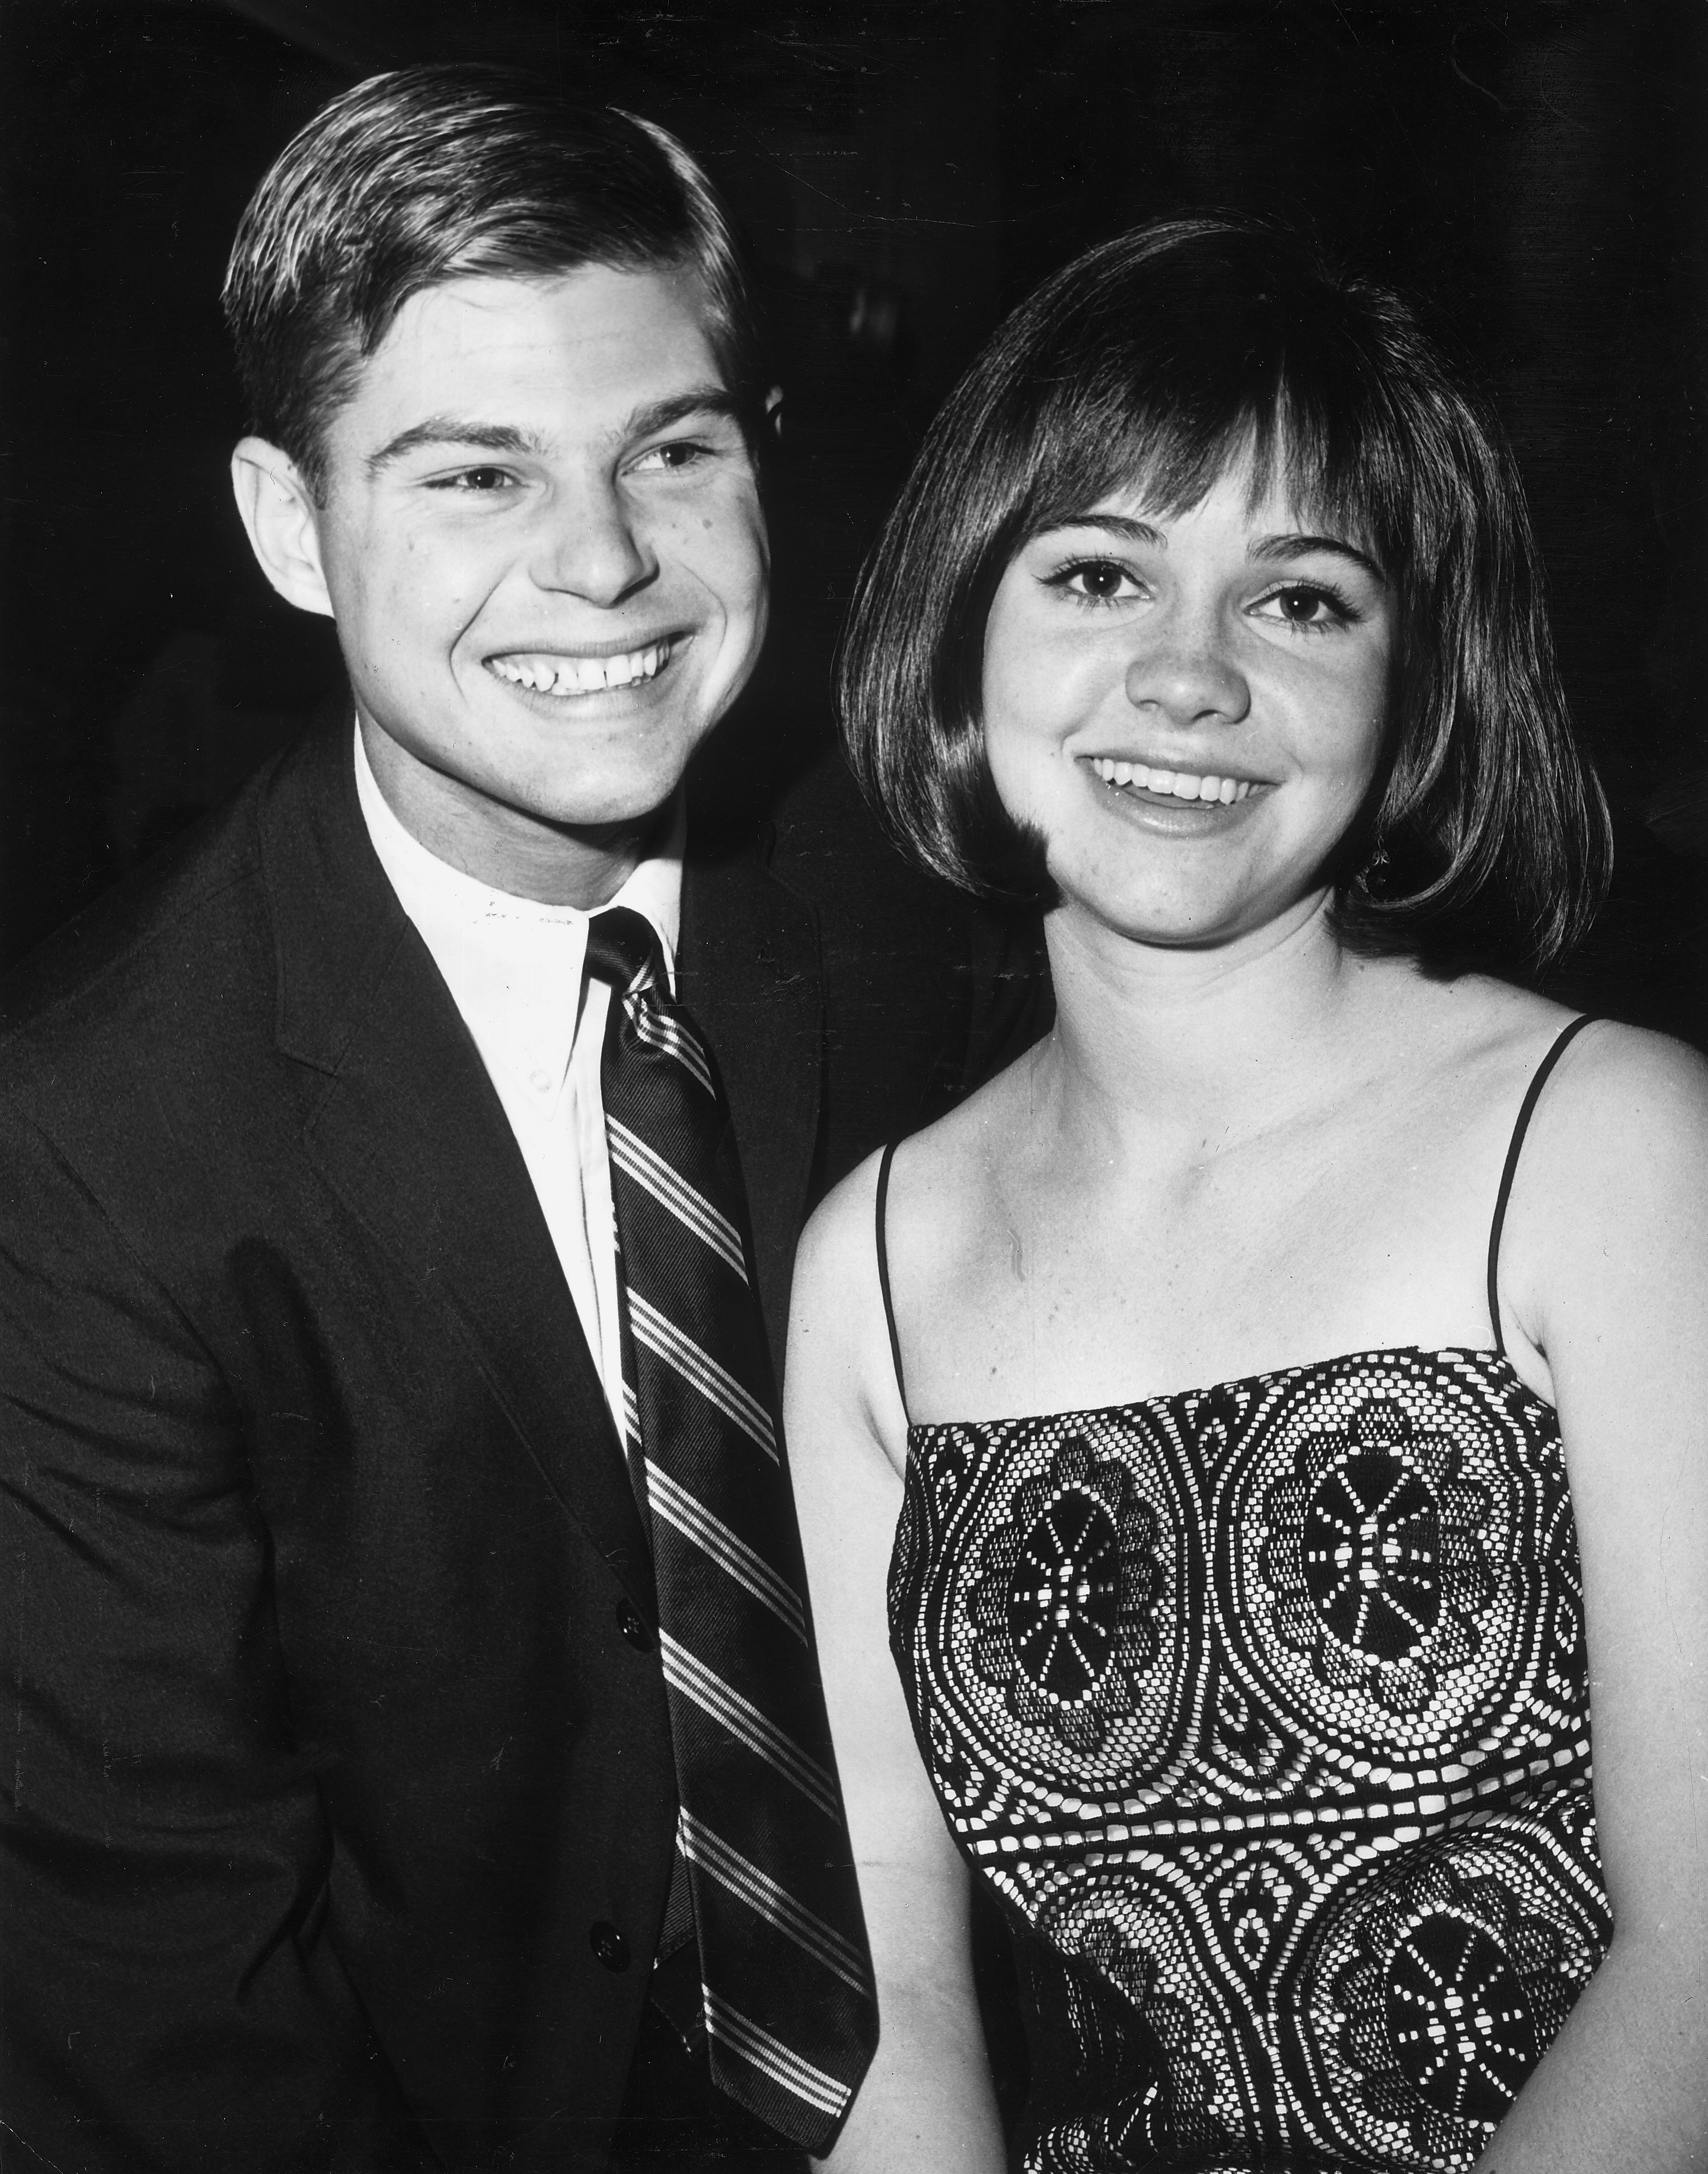 Sally Field and Steven Craig in 1965 | Source: Getty Images